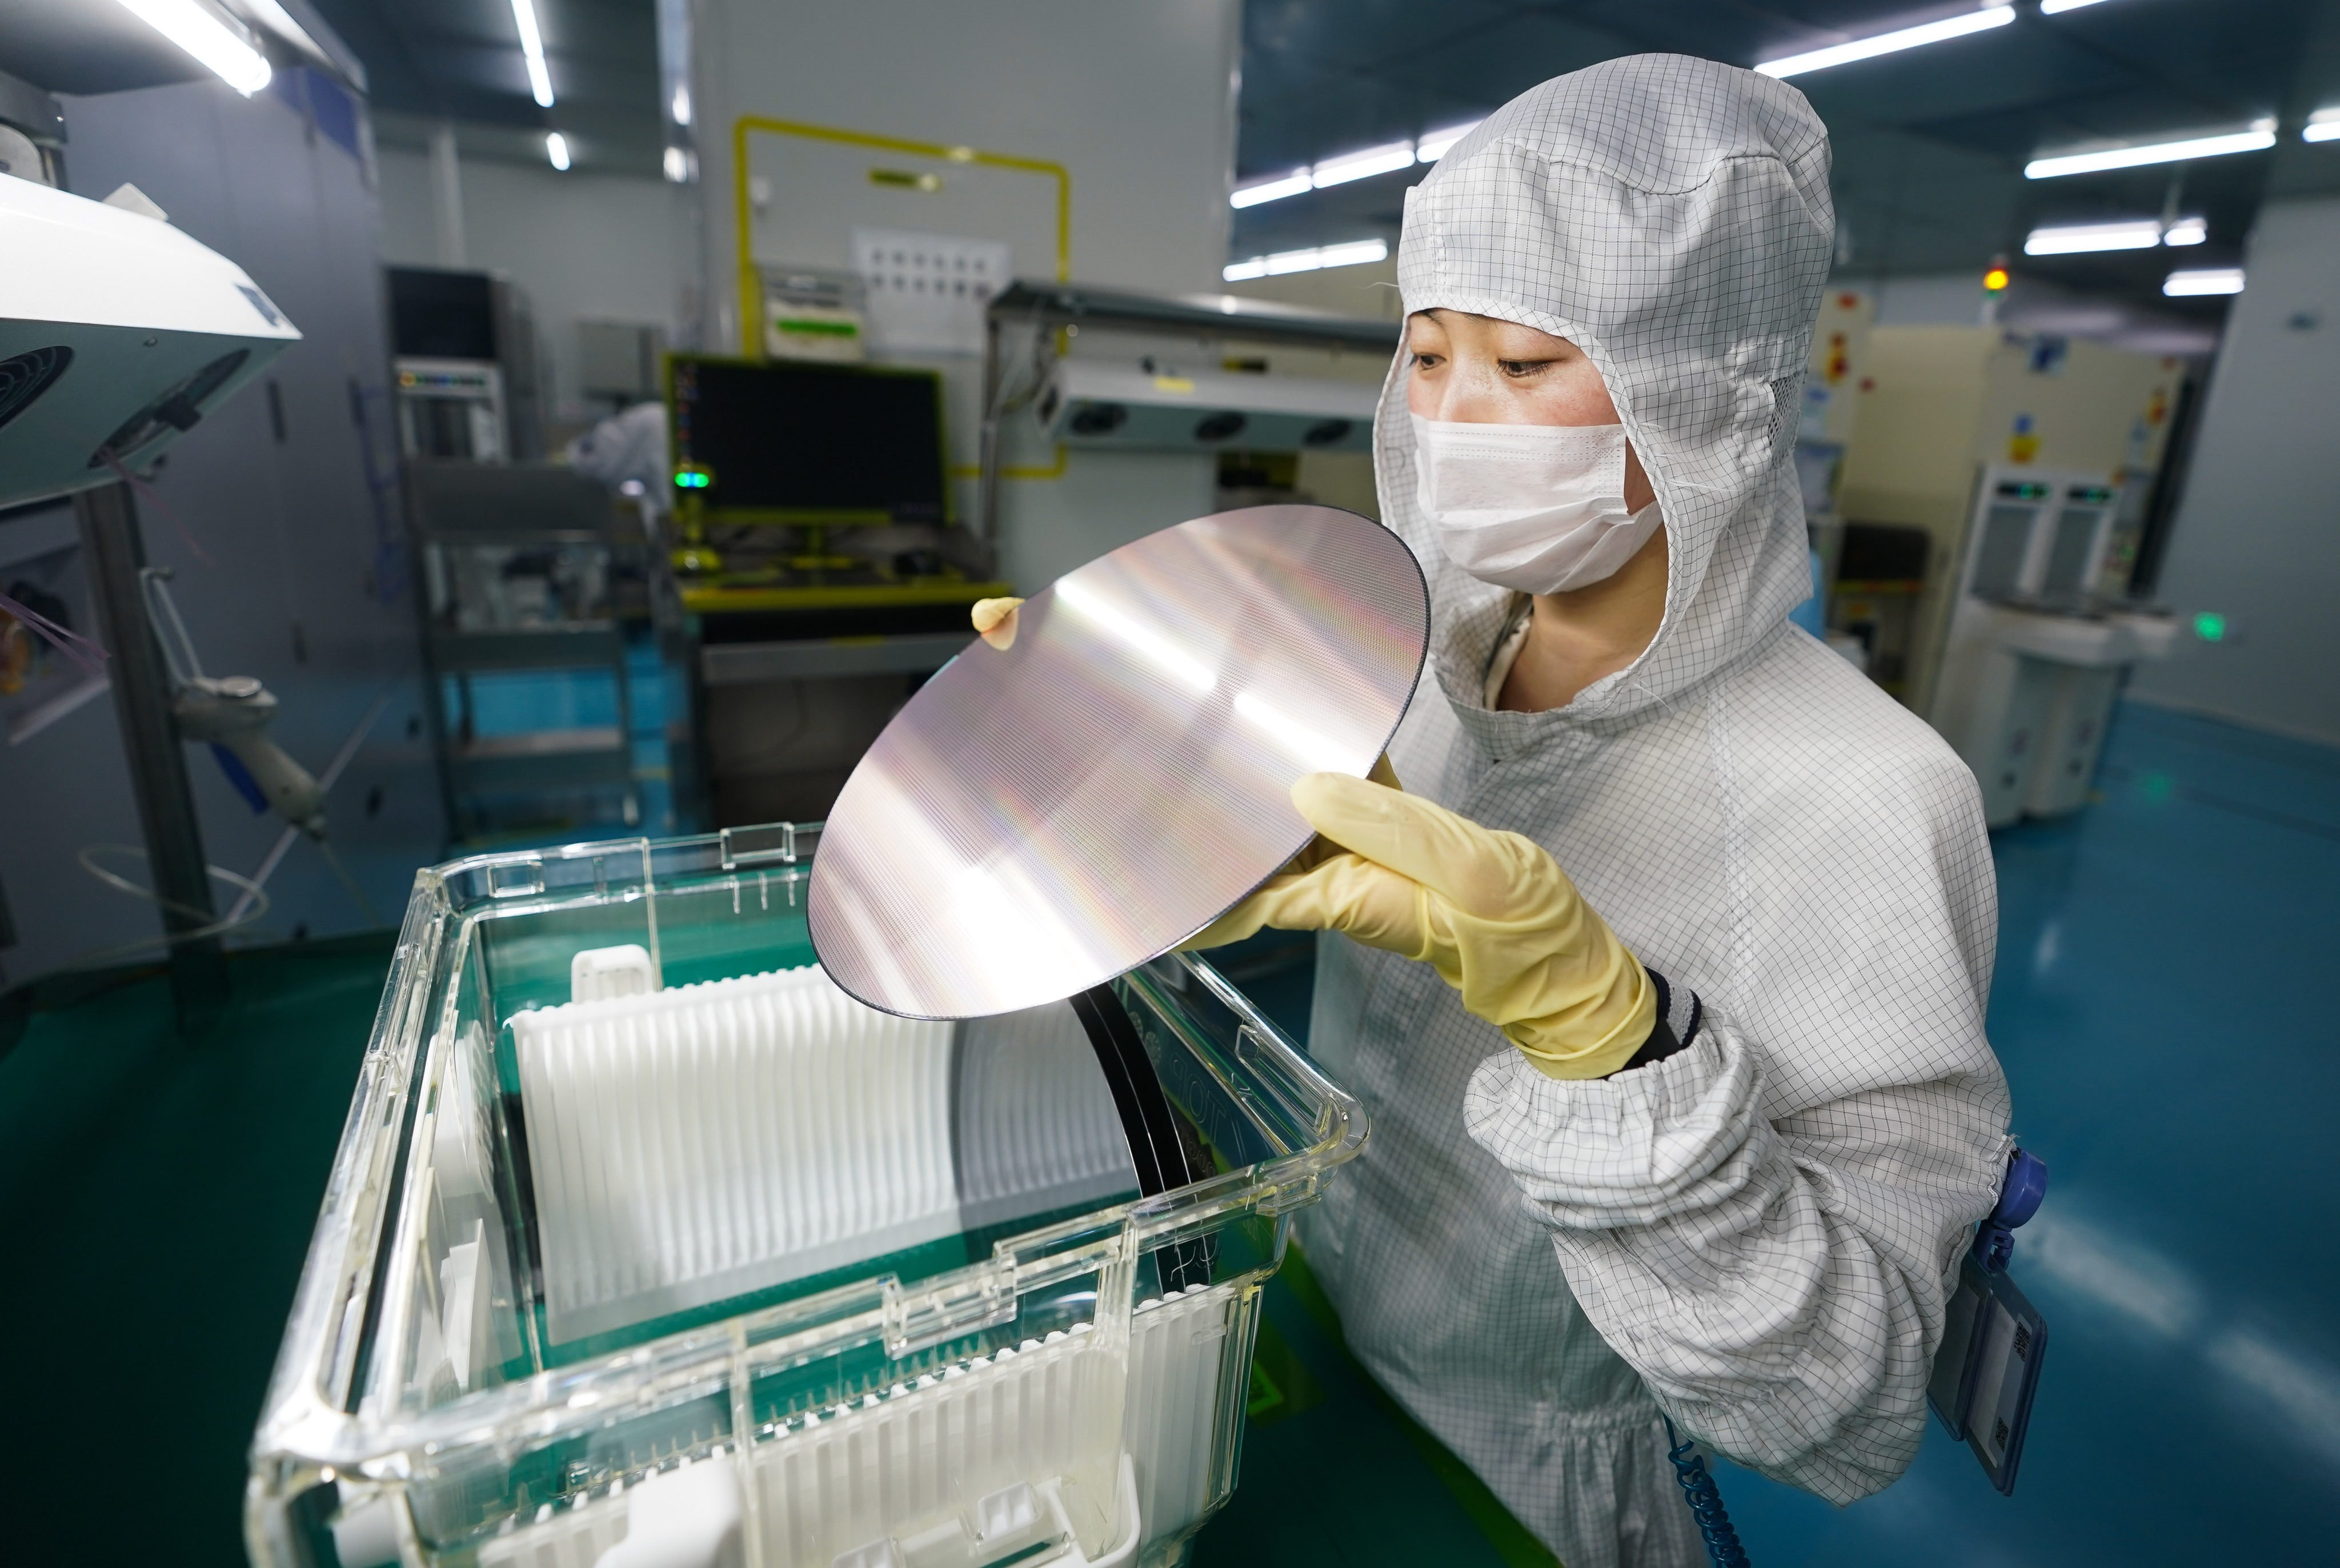 The US is seeking to curb China’s ability to make advanced semiconductors. Photo: Xinhua